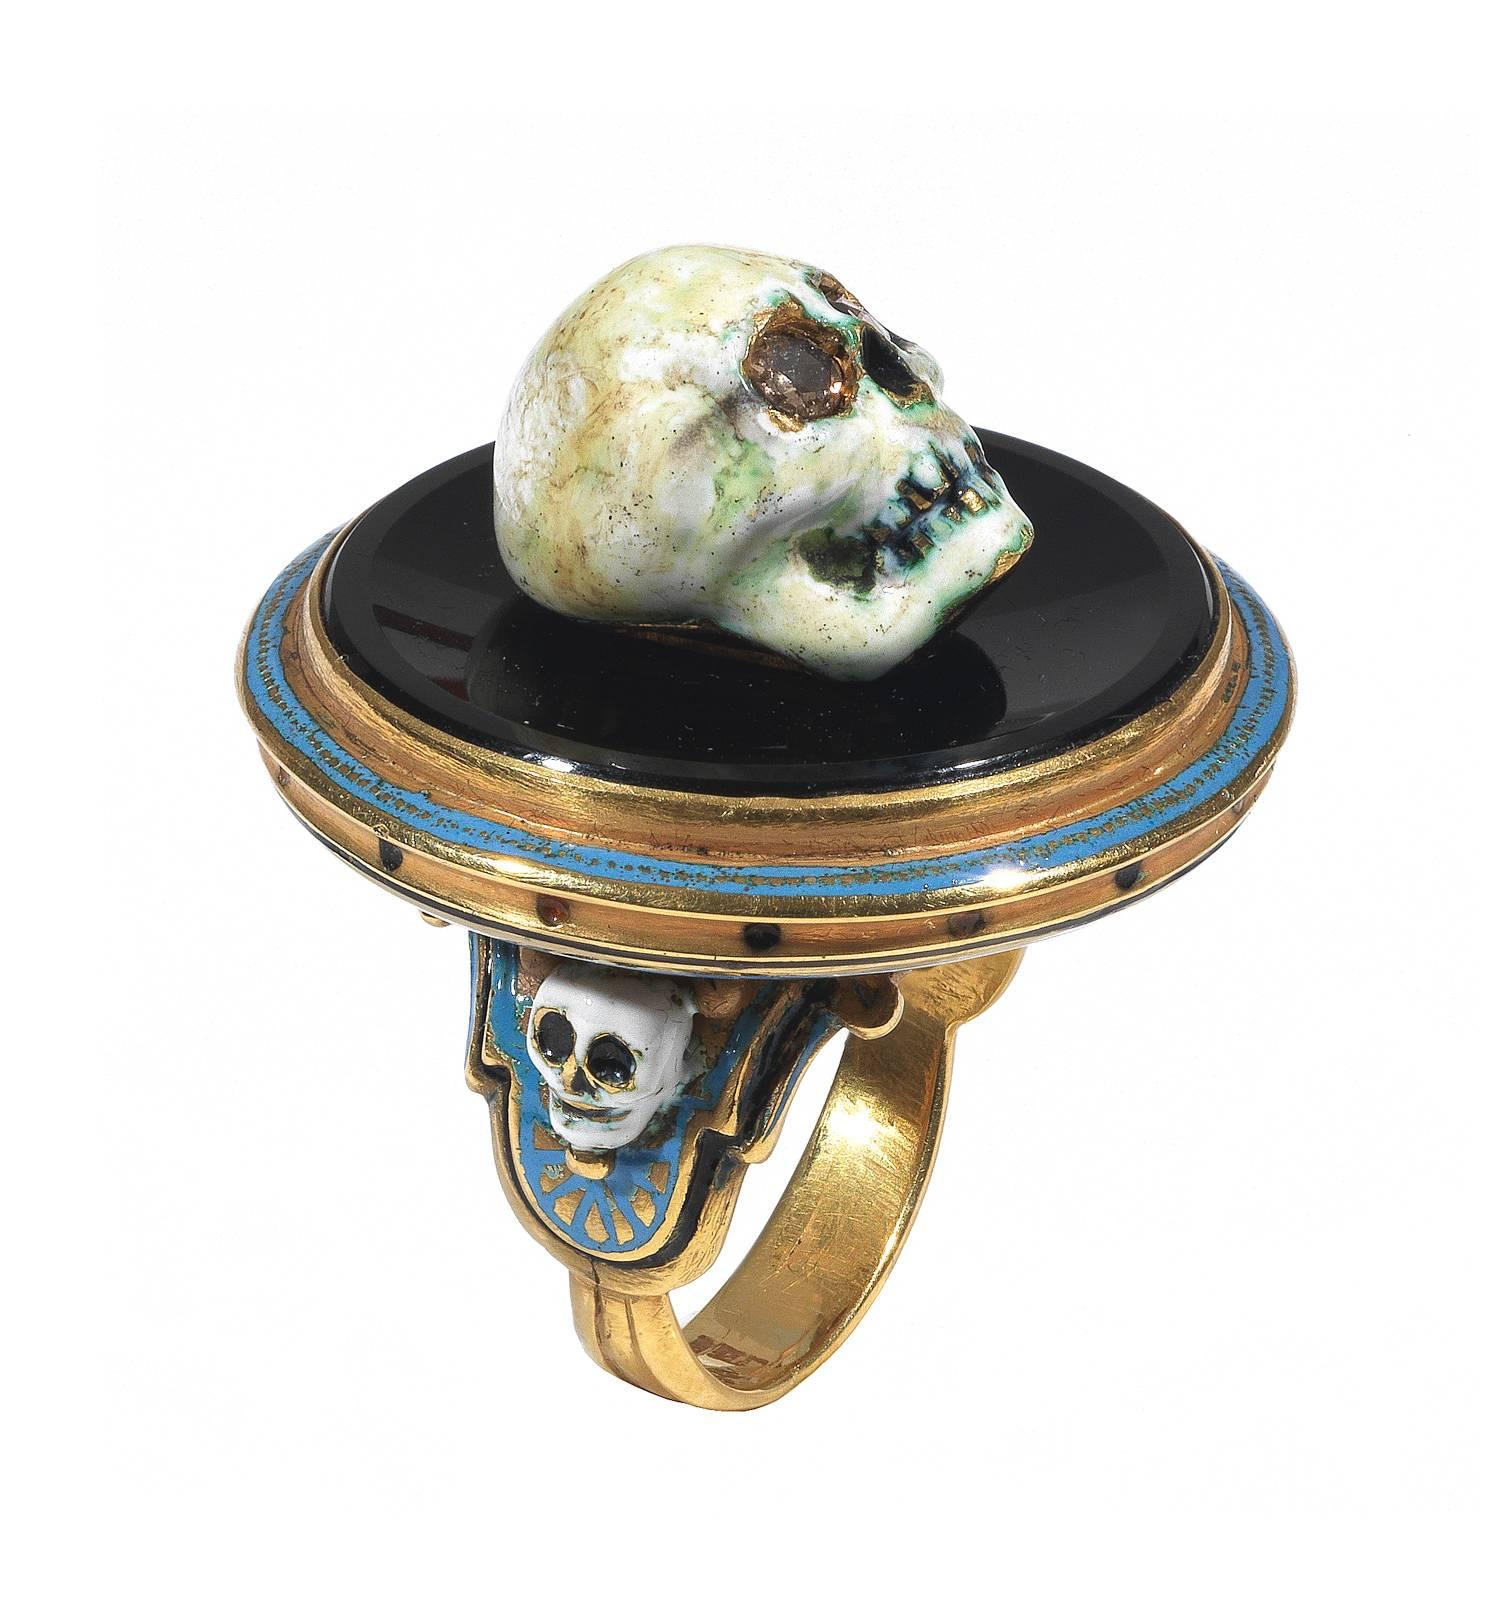 

Renaissance style Memento Mori skull ring made with champleve multicolored enamels, a round onyx, and rose cut diamonds

Mounted in 18Kt gold

Signed A. Codognato Venezia

Weight: 34 gr

Finger size: 7  

